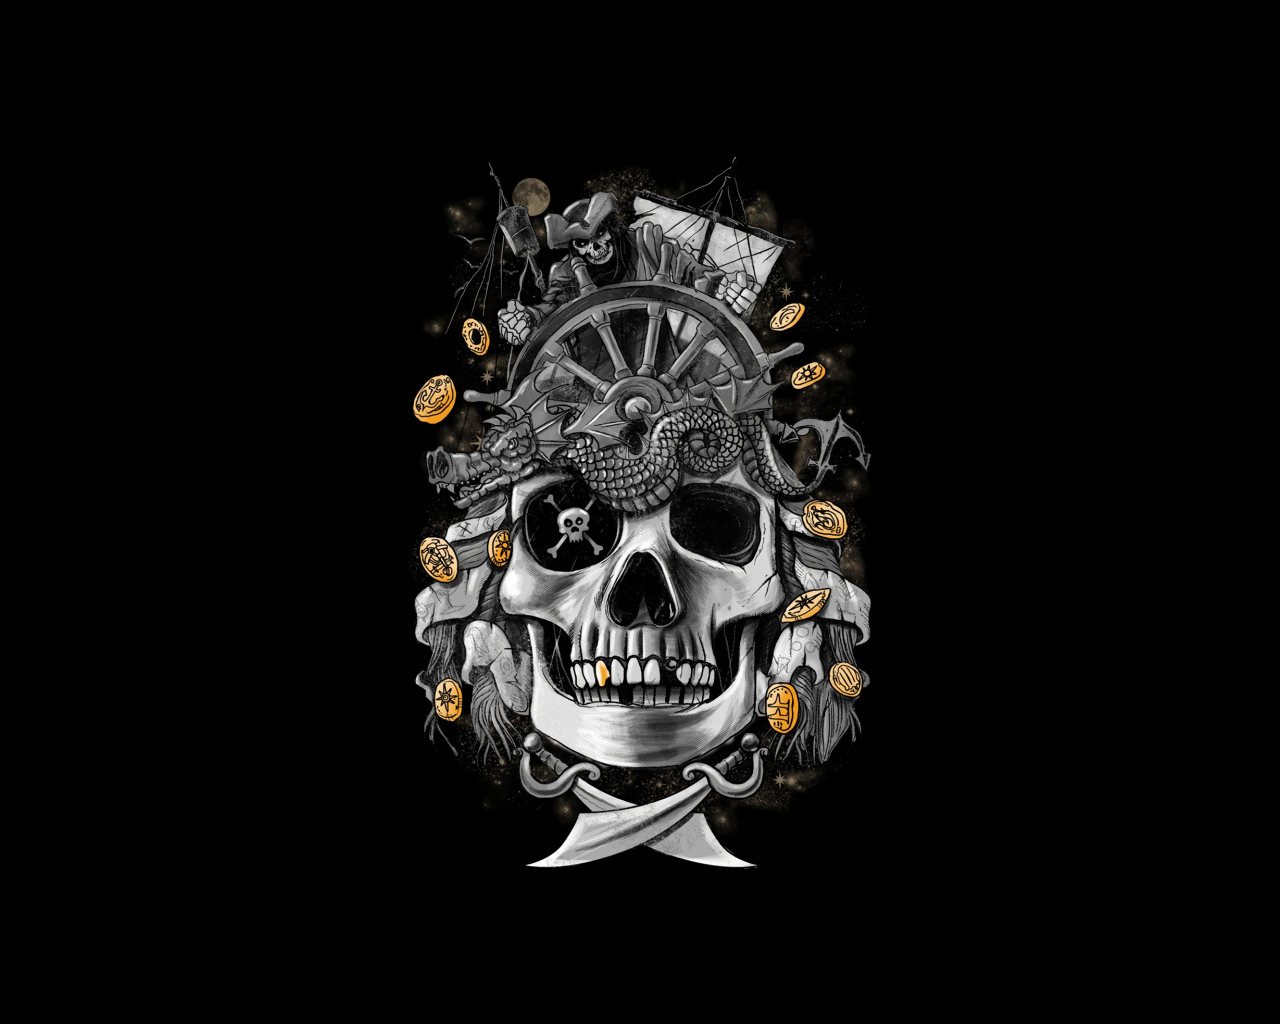 Pirate skull with coins on black background